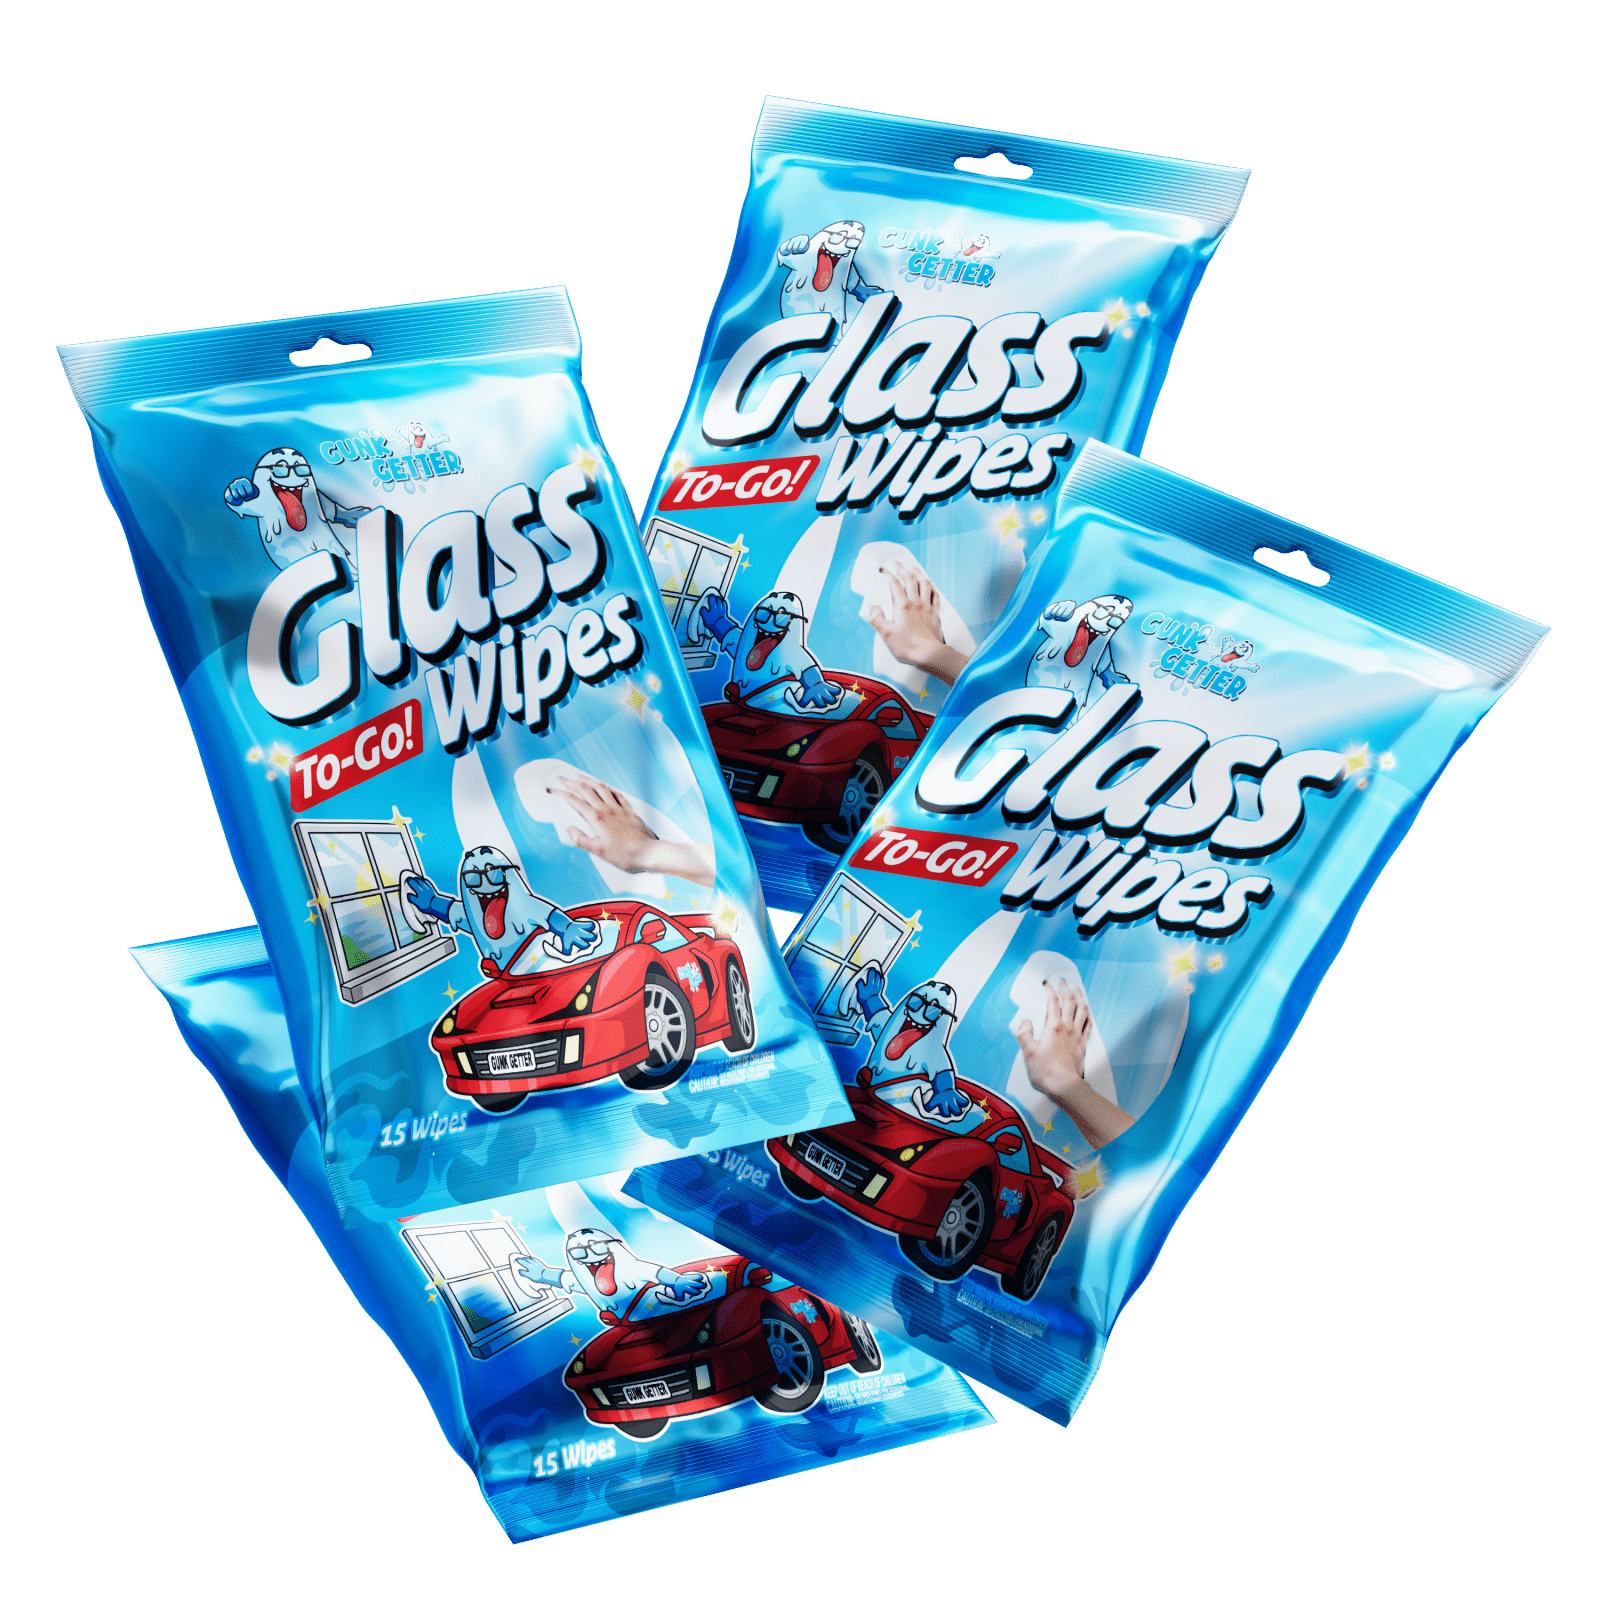 Powerhouse Glass Cleaner Wipes, Glass Cleaner